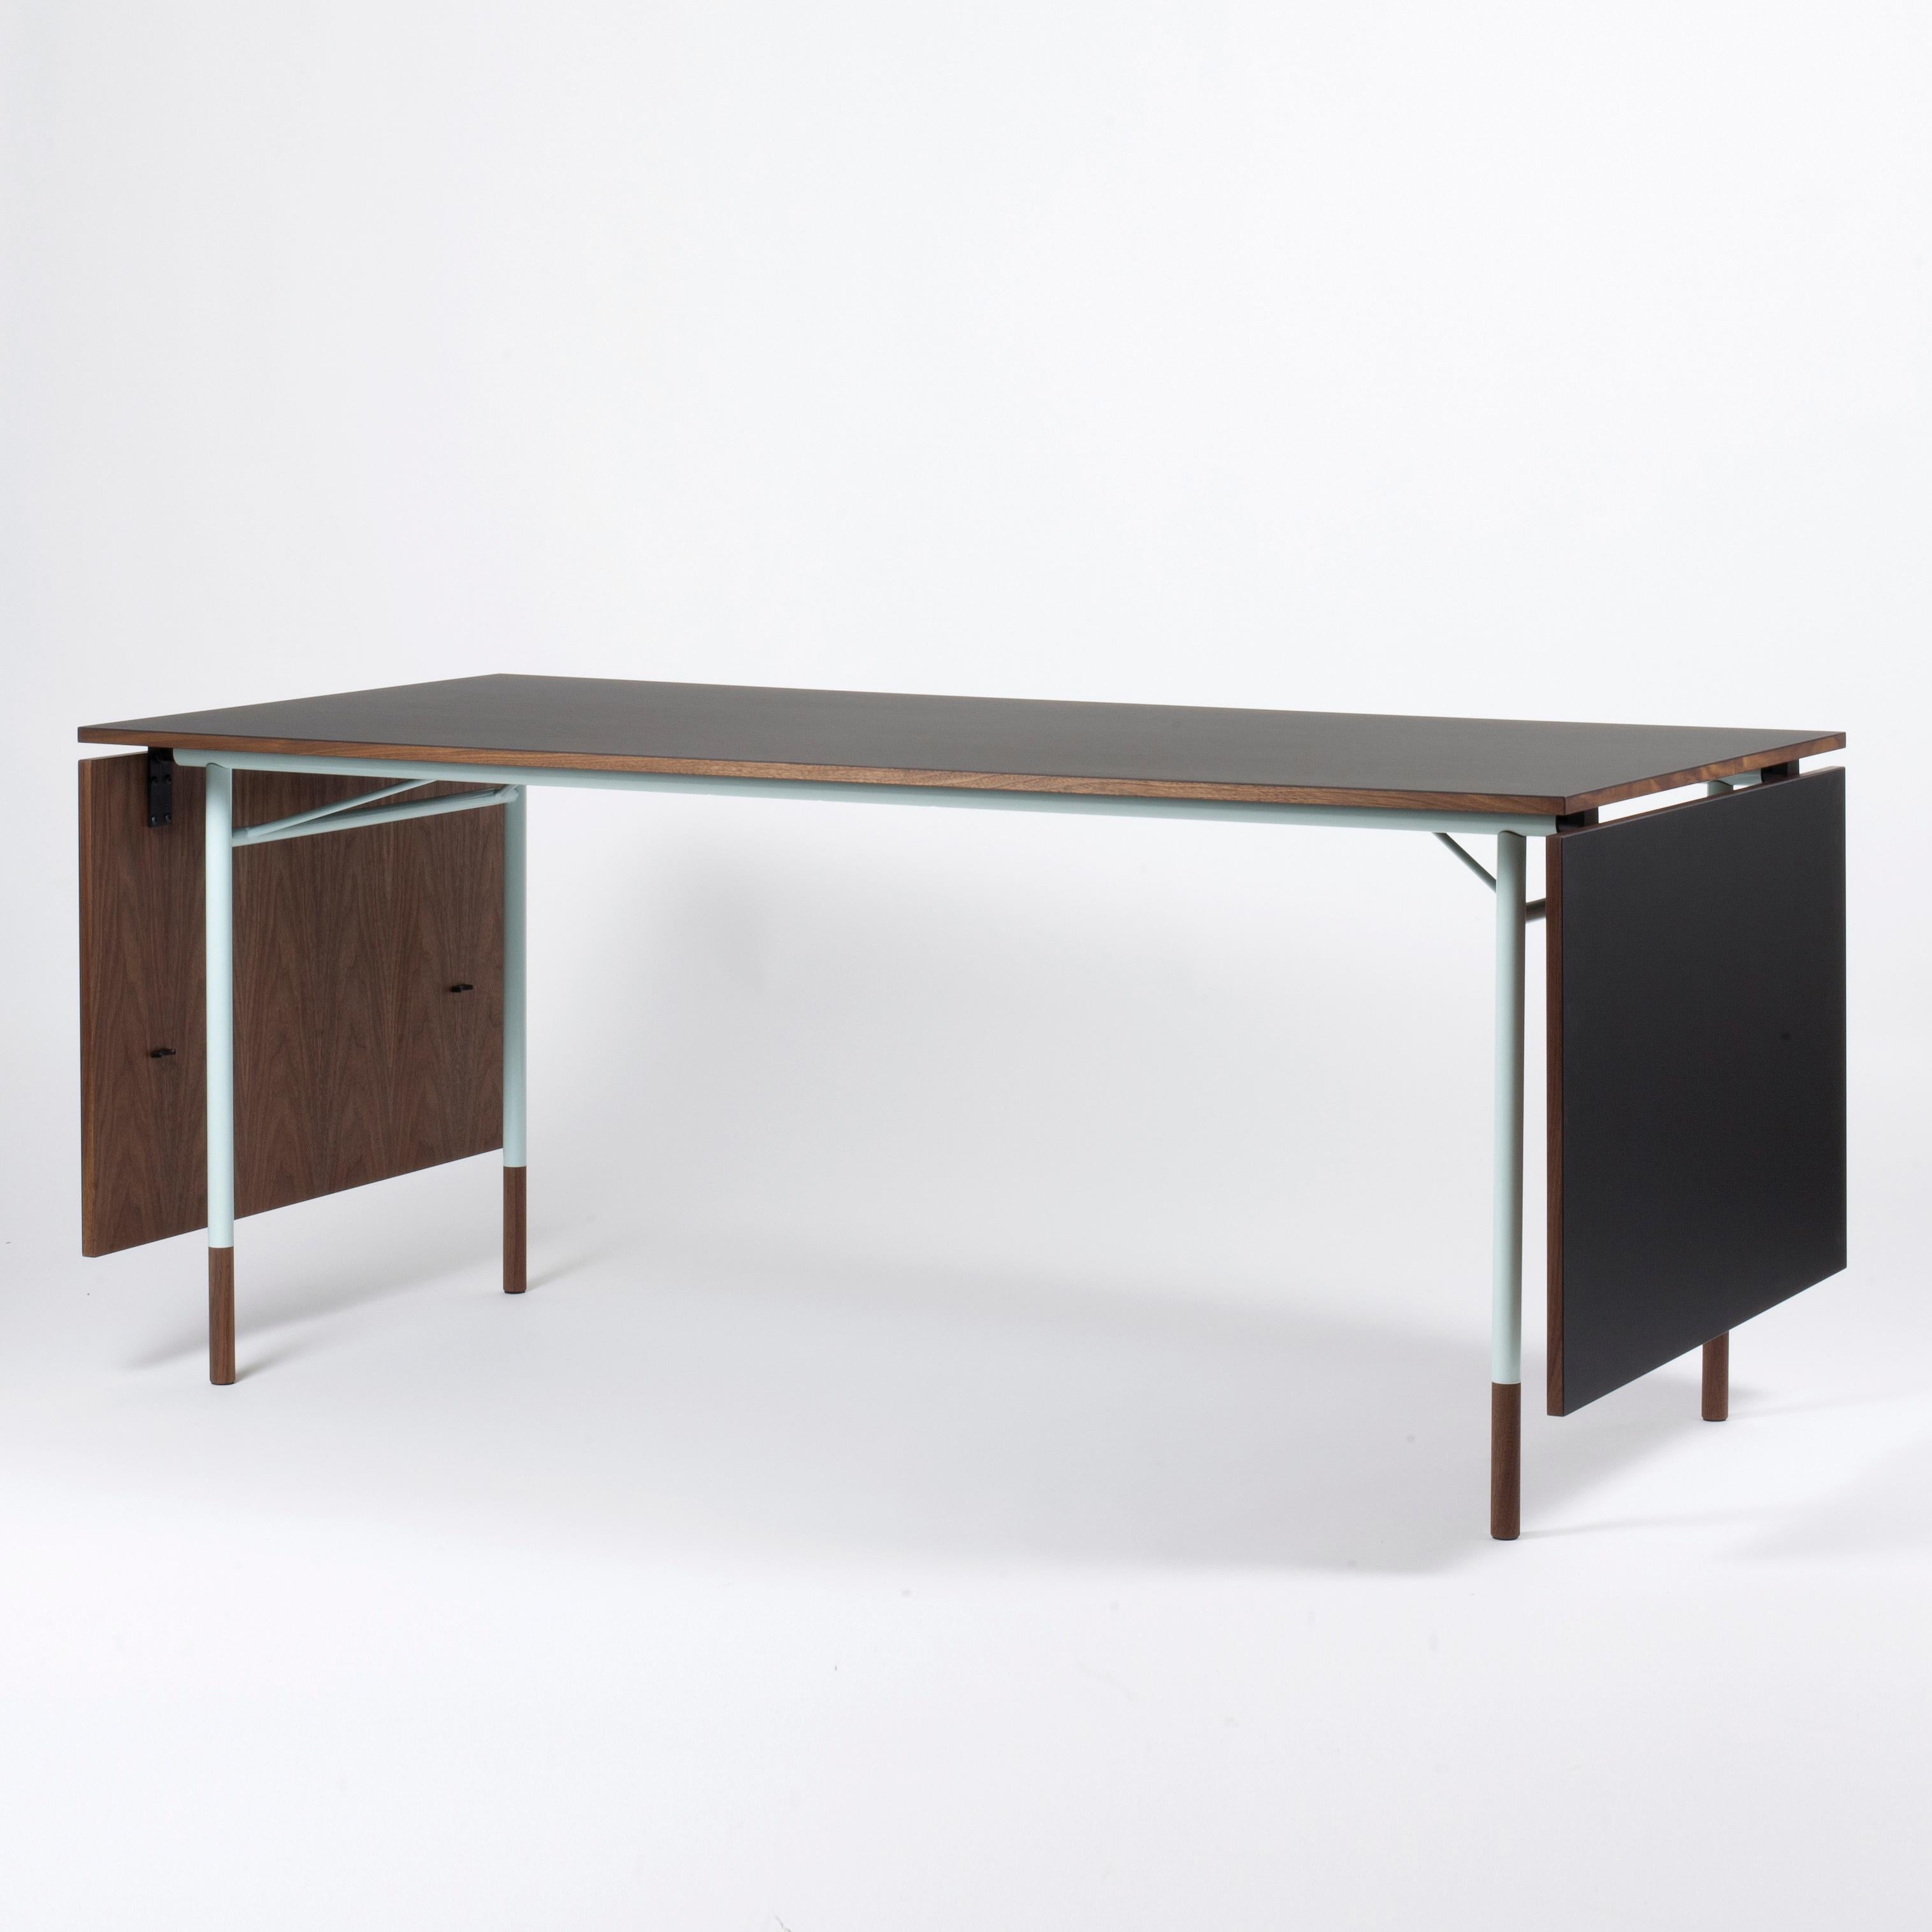 Contemporary Finn Juhl Nyhavn Dining Table with Two Drop Leaves, Lino and Wood